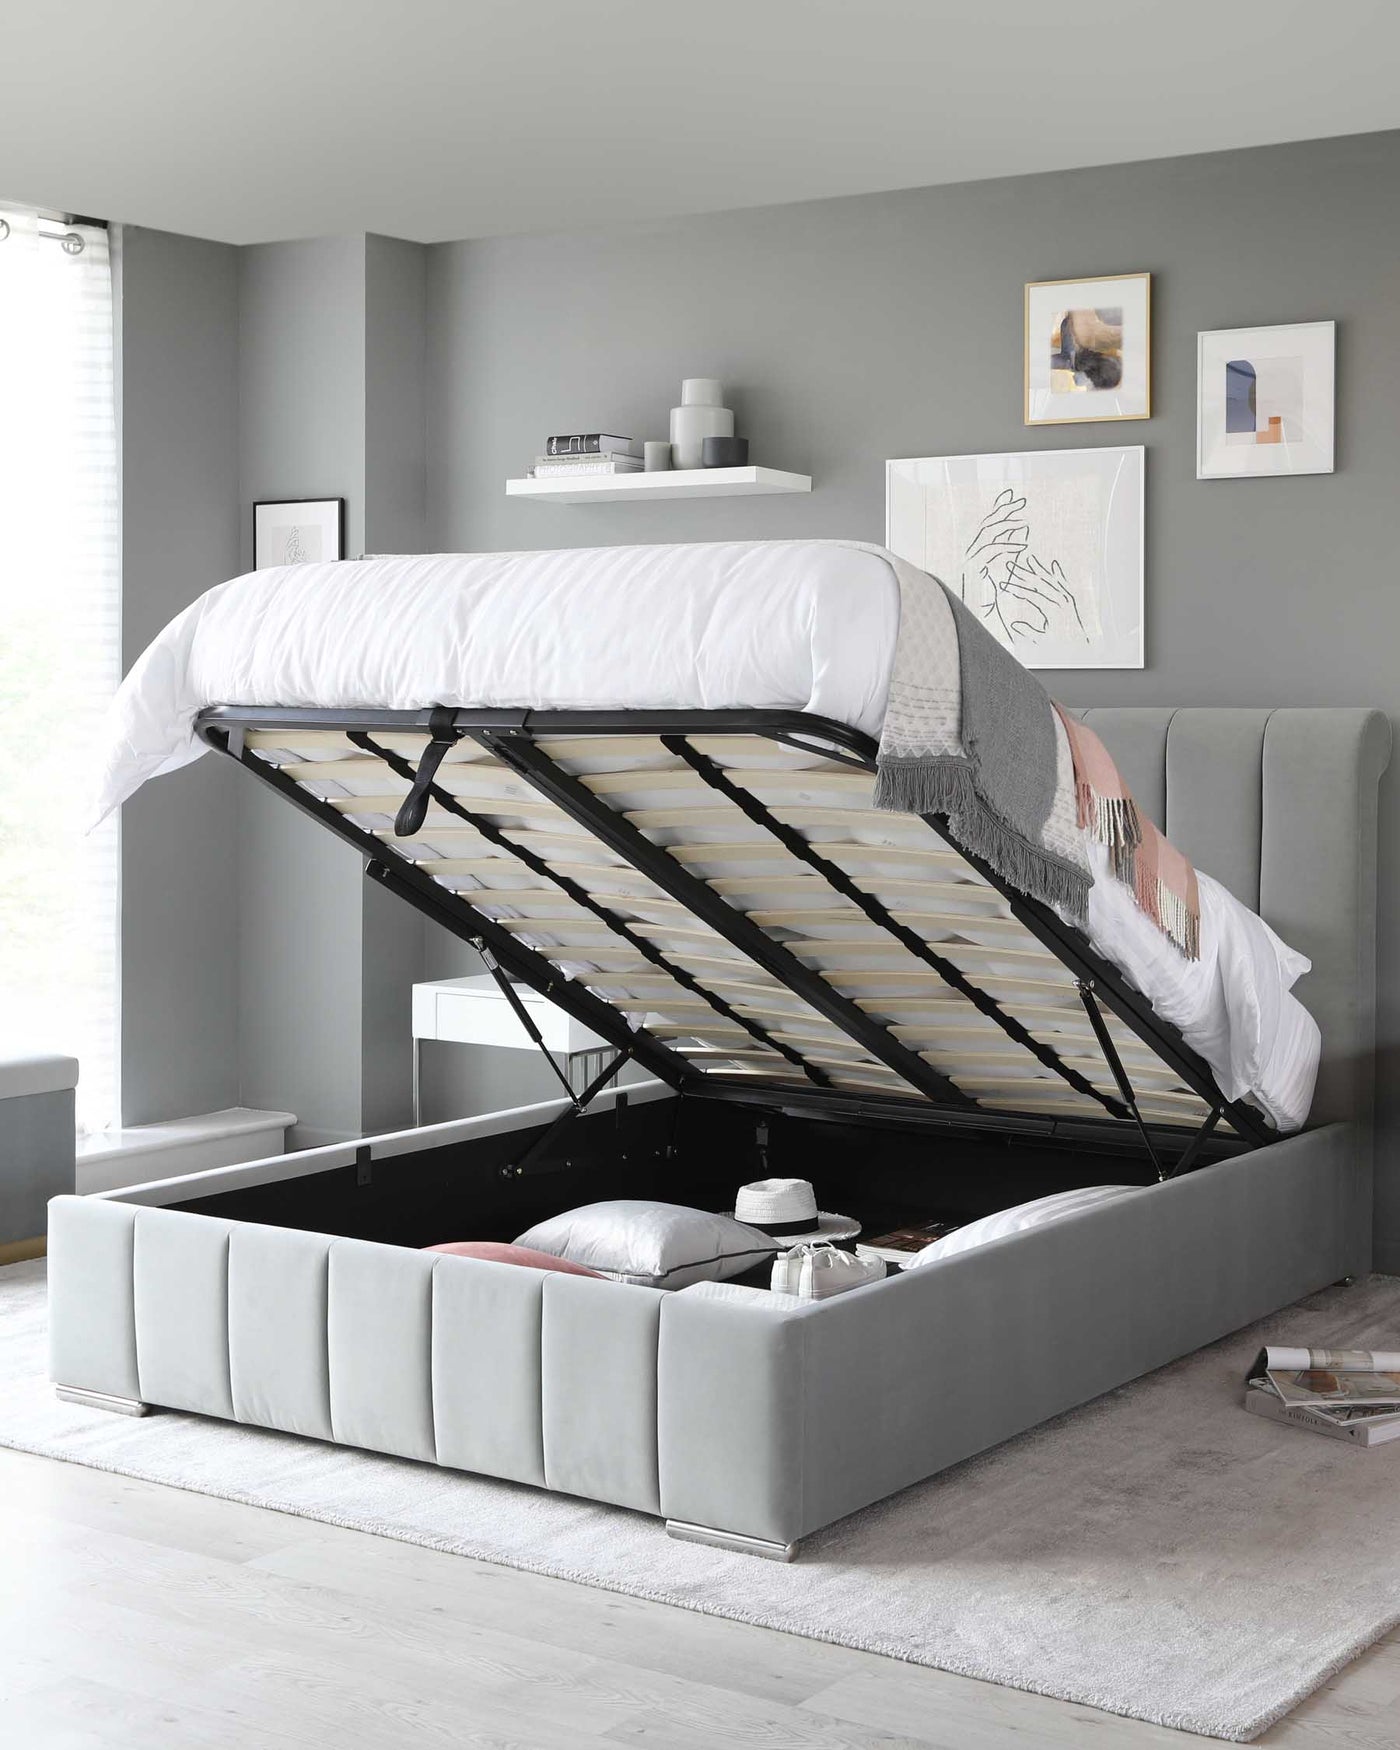 Upholstered storage bed with tufted headboard in light grey, featuring a lift-up frame for under-mattress storage, set in a modern bedroom with coordinating decor.